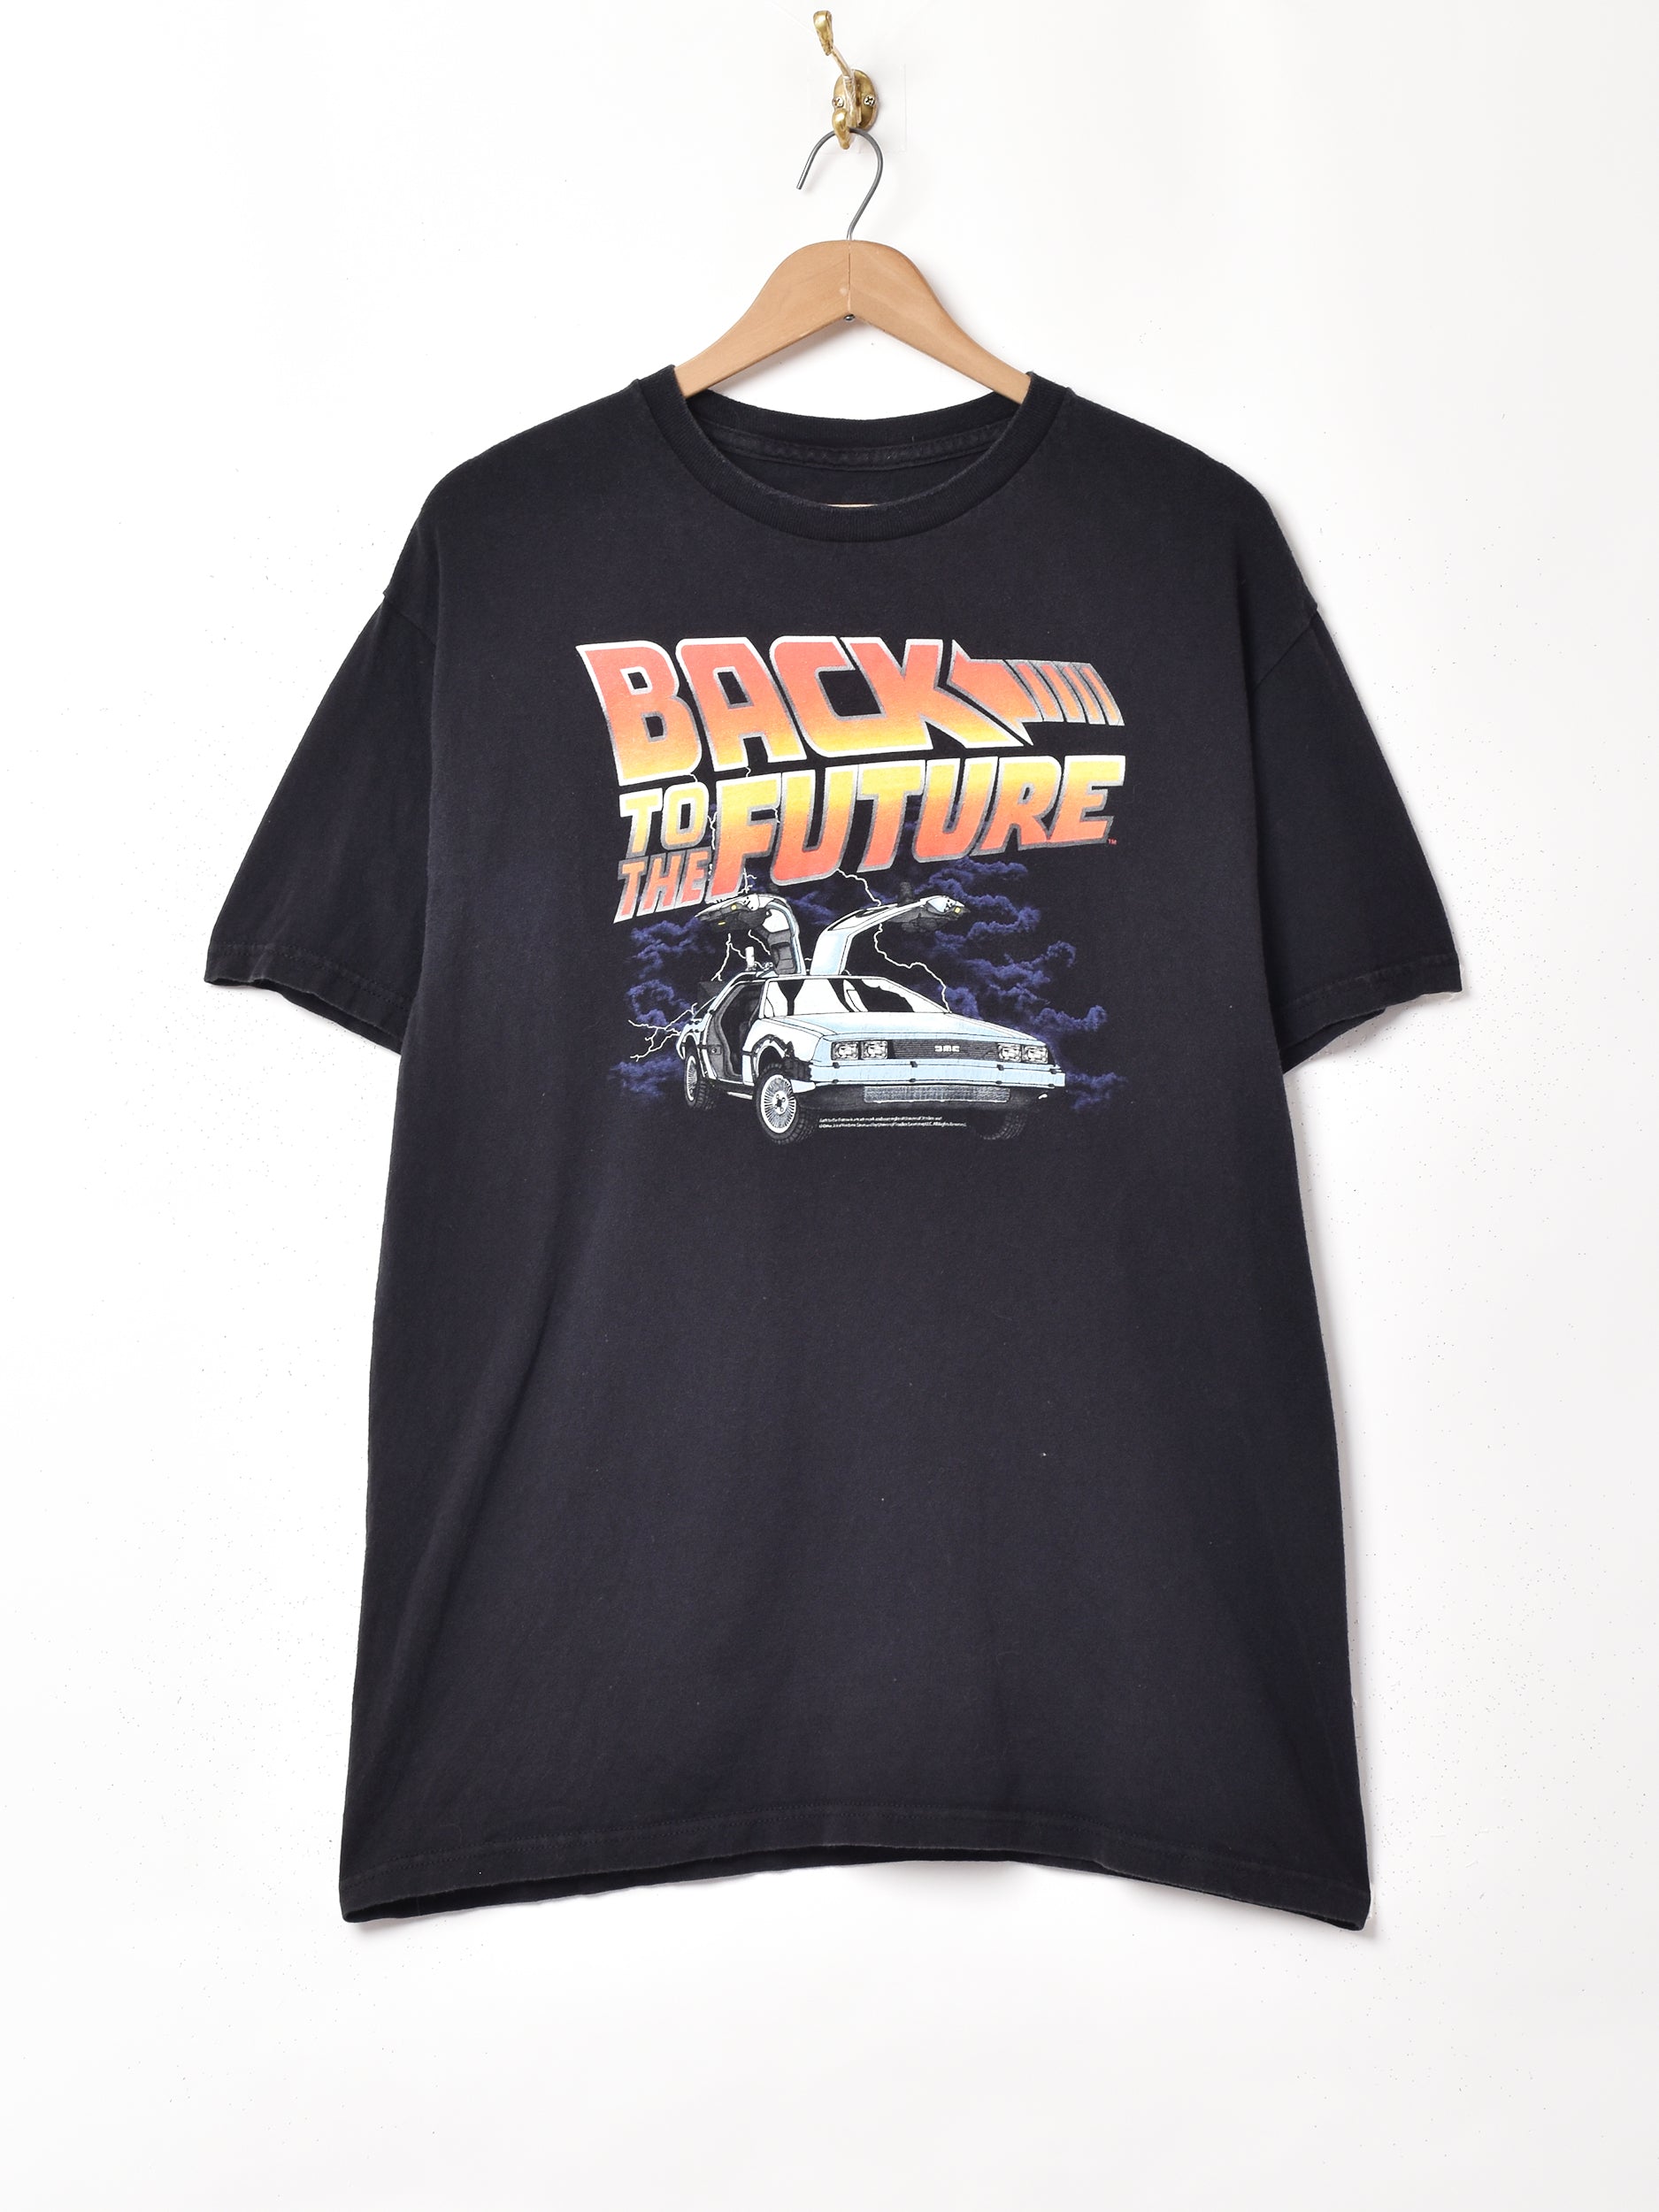 BACK TO THE FUTURE プリントTシャツ – 古着屋Top of the Hillのネット